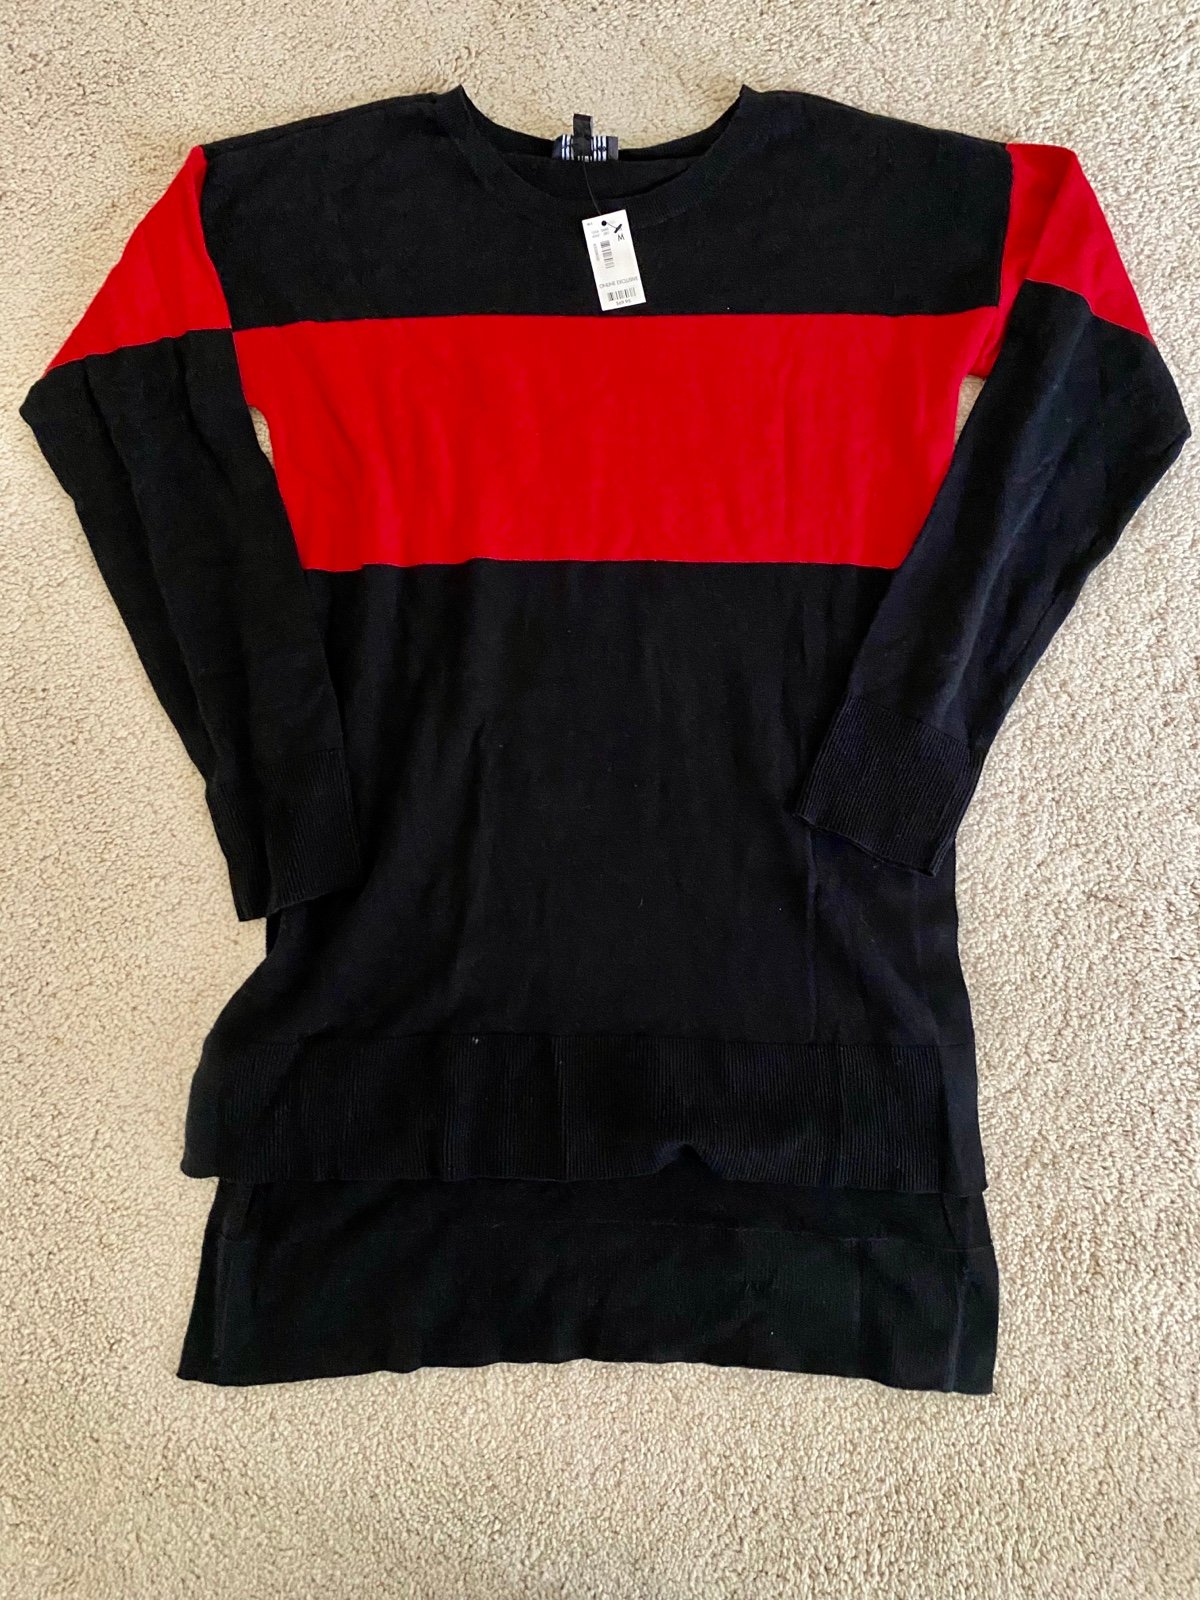 large selection NWT The Limited red & black sweater size medium JldE9cBqX well sale